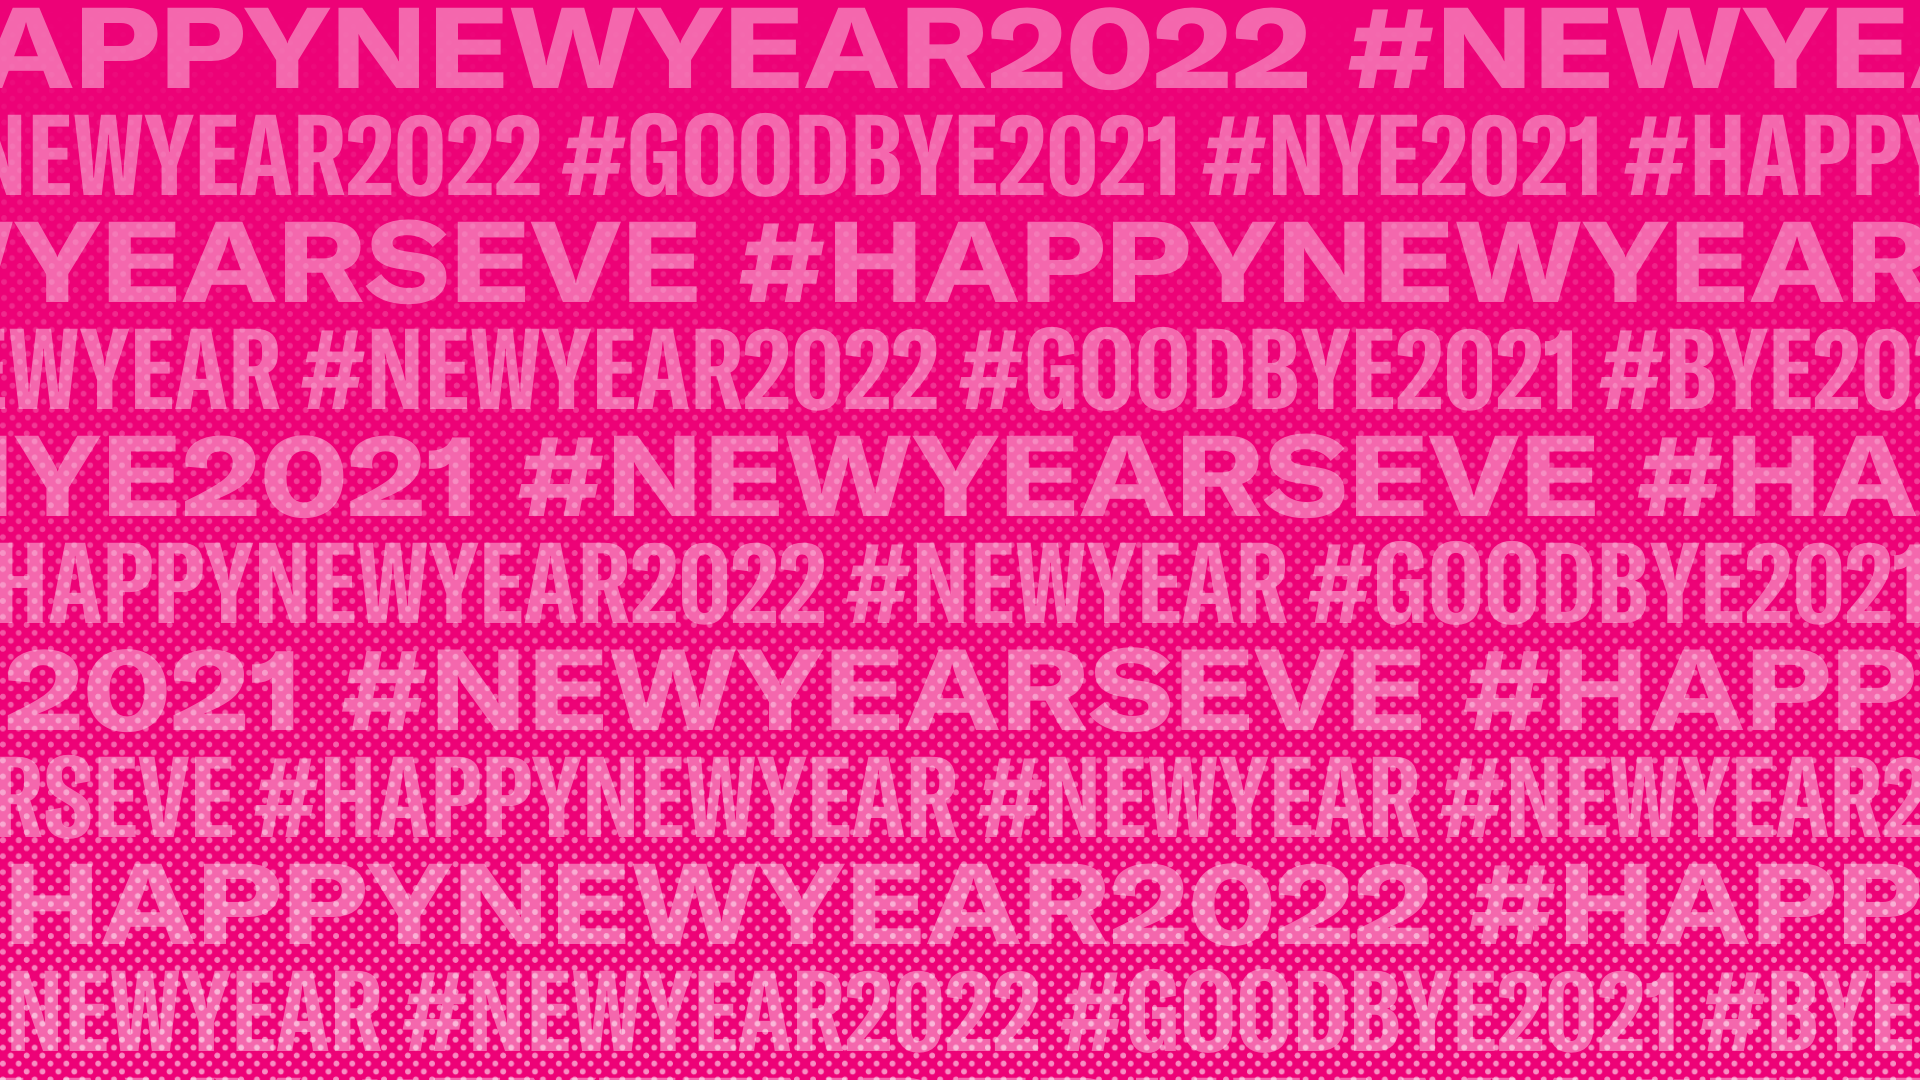 Top New Year hashtags and trending topics to start 2022